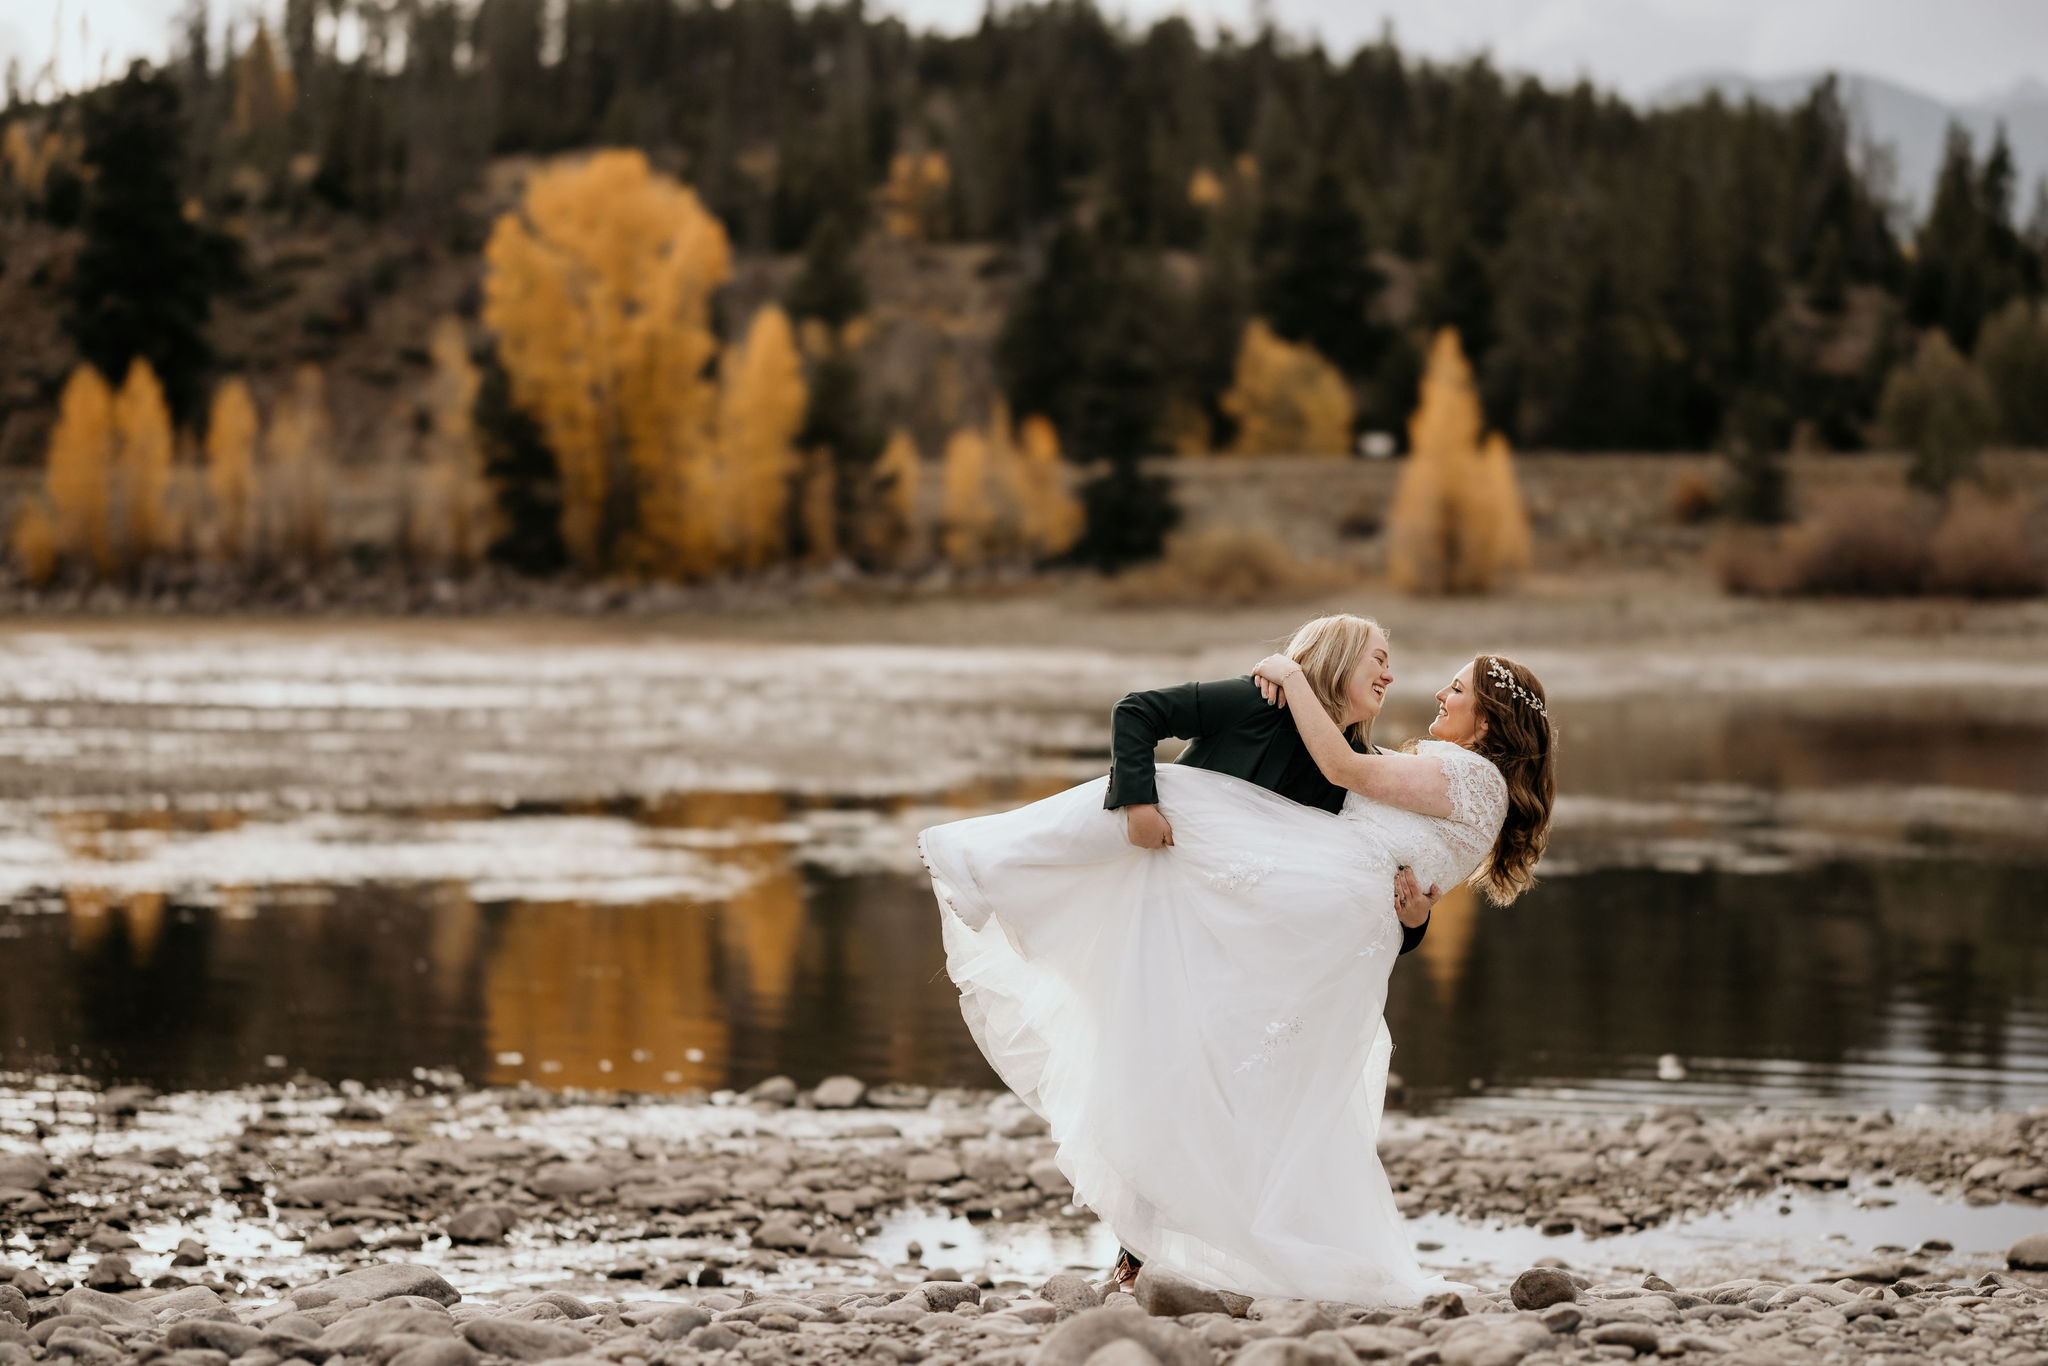 LGBTQ+ couple embraces by alpine lake during colorado elopement wedding.